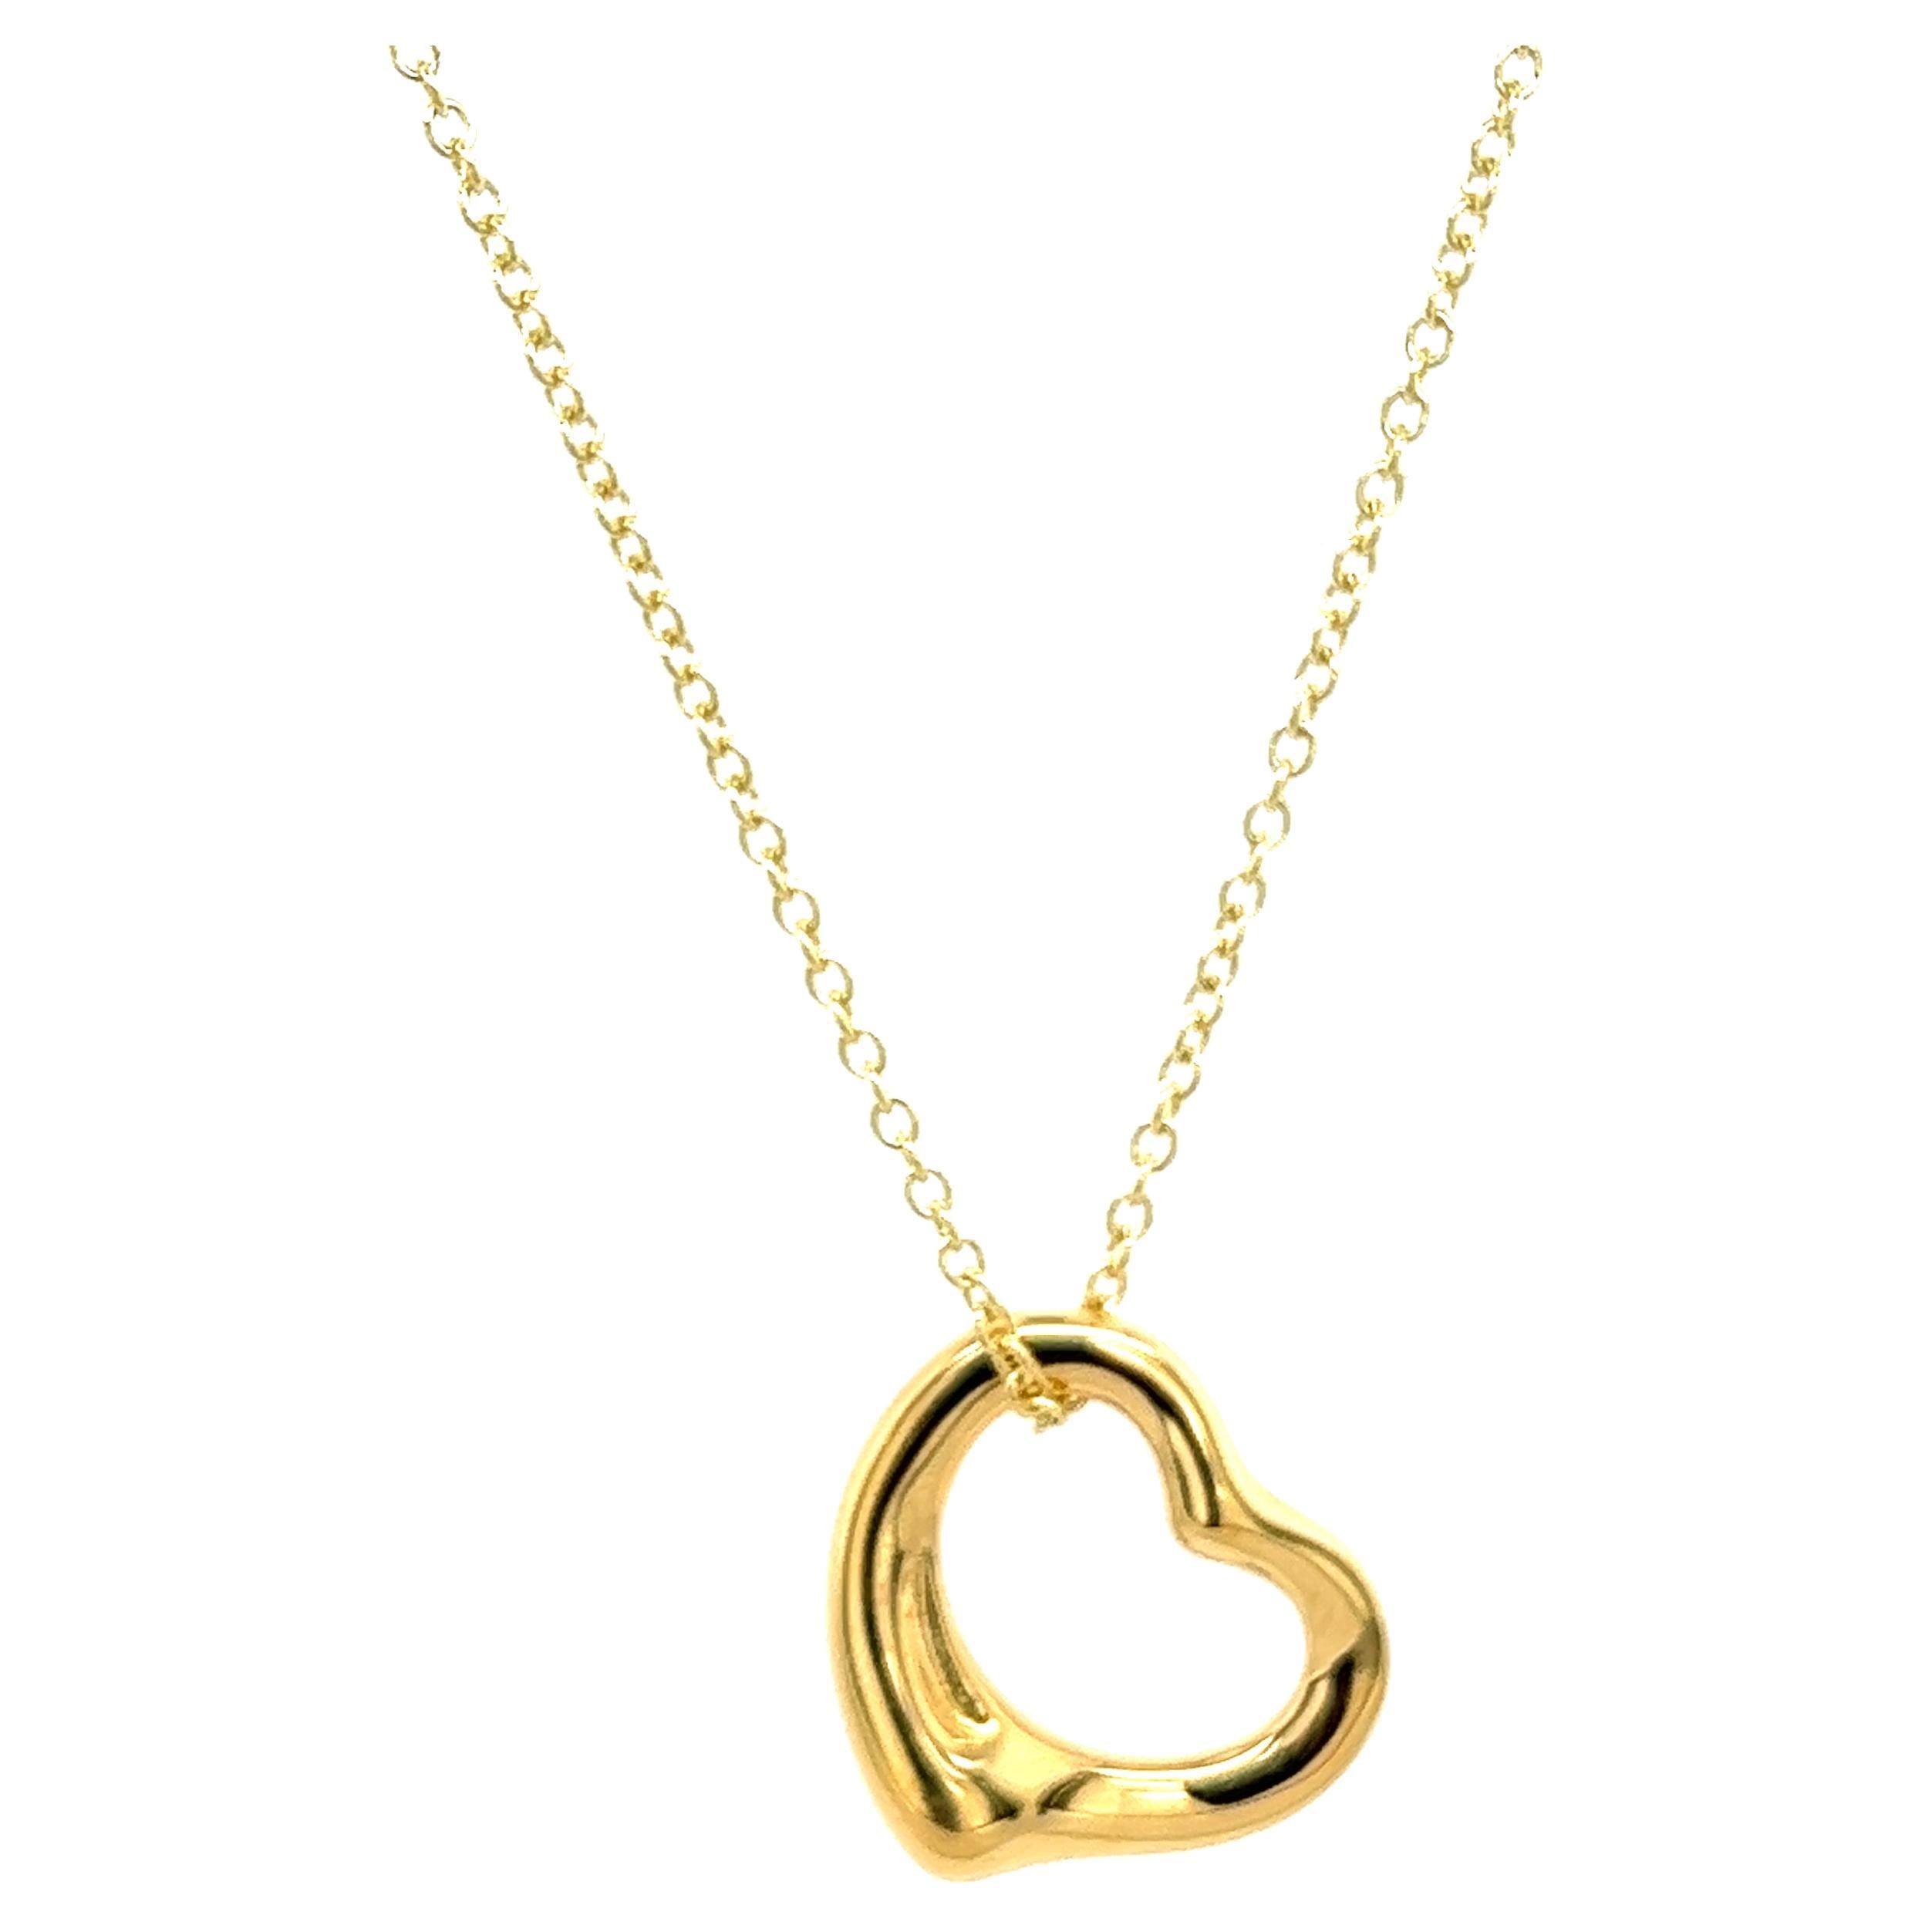 18ct Yellow Gold Heart Shape Pendant Suspended From 18ct Yellow Gold Chain 20" For Sale